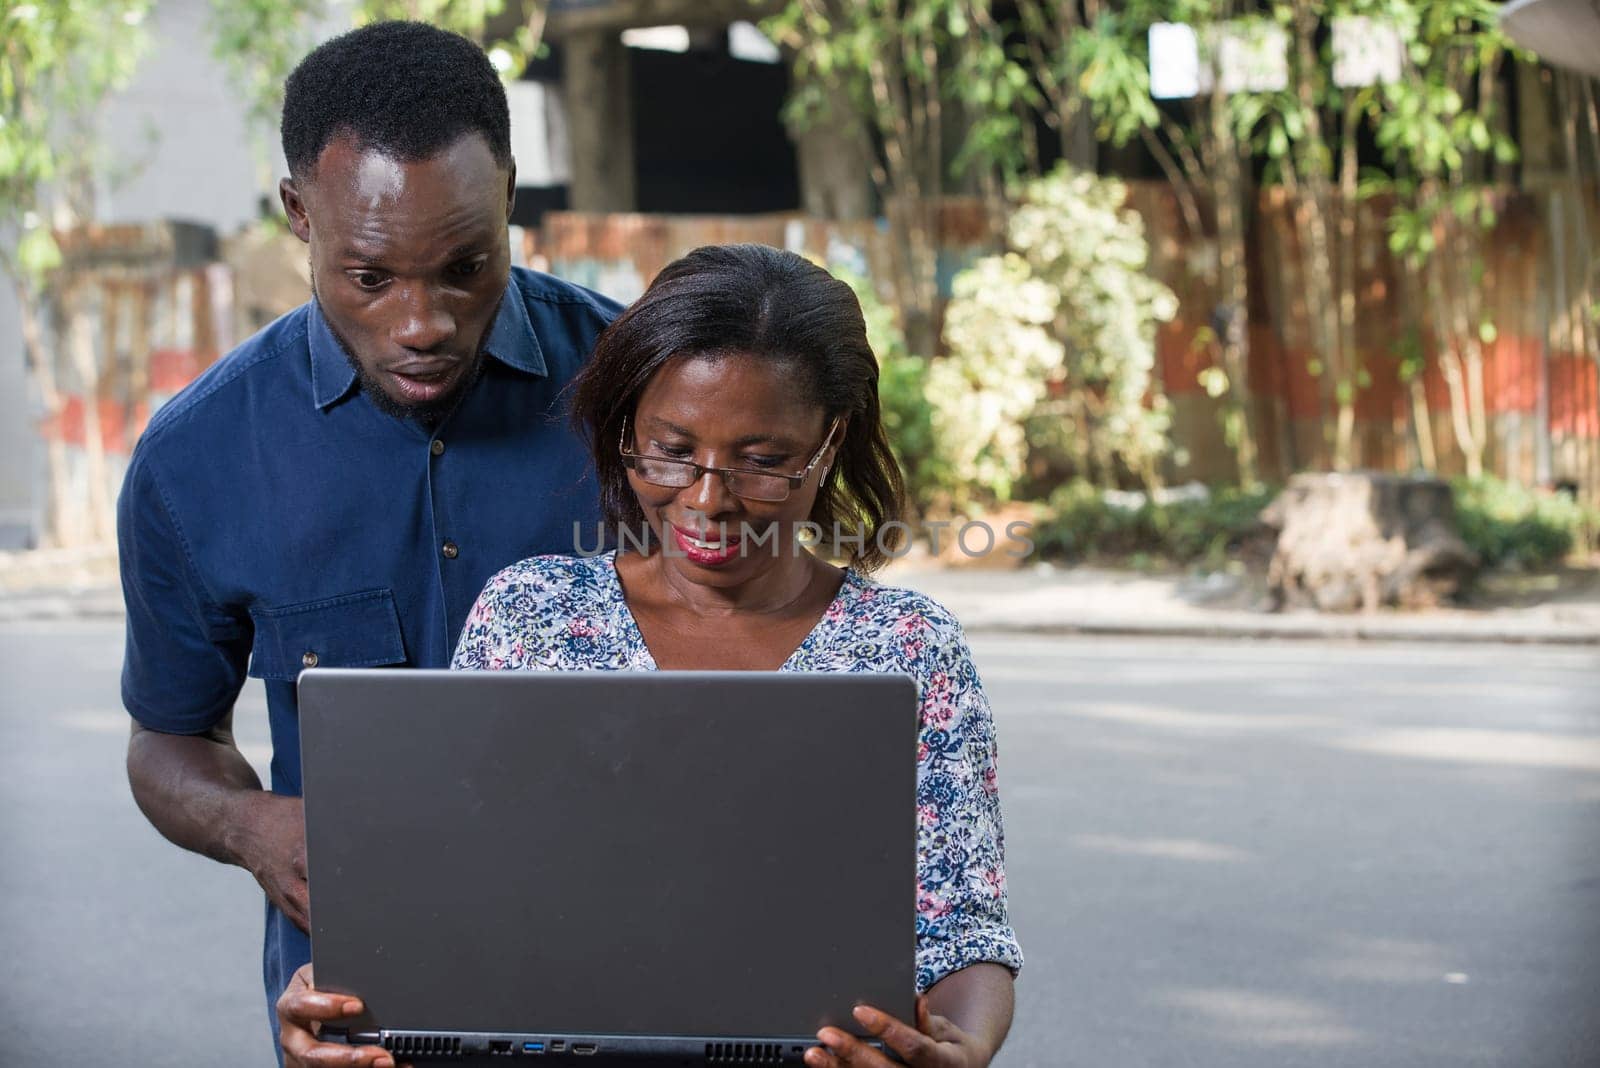 young couple outdoors looking at laptop smiling.